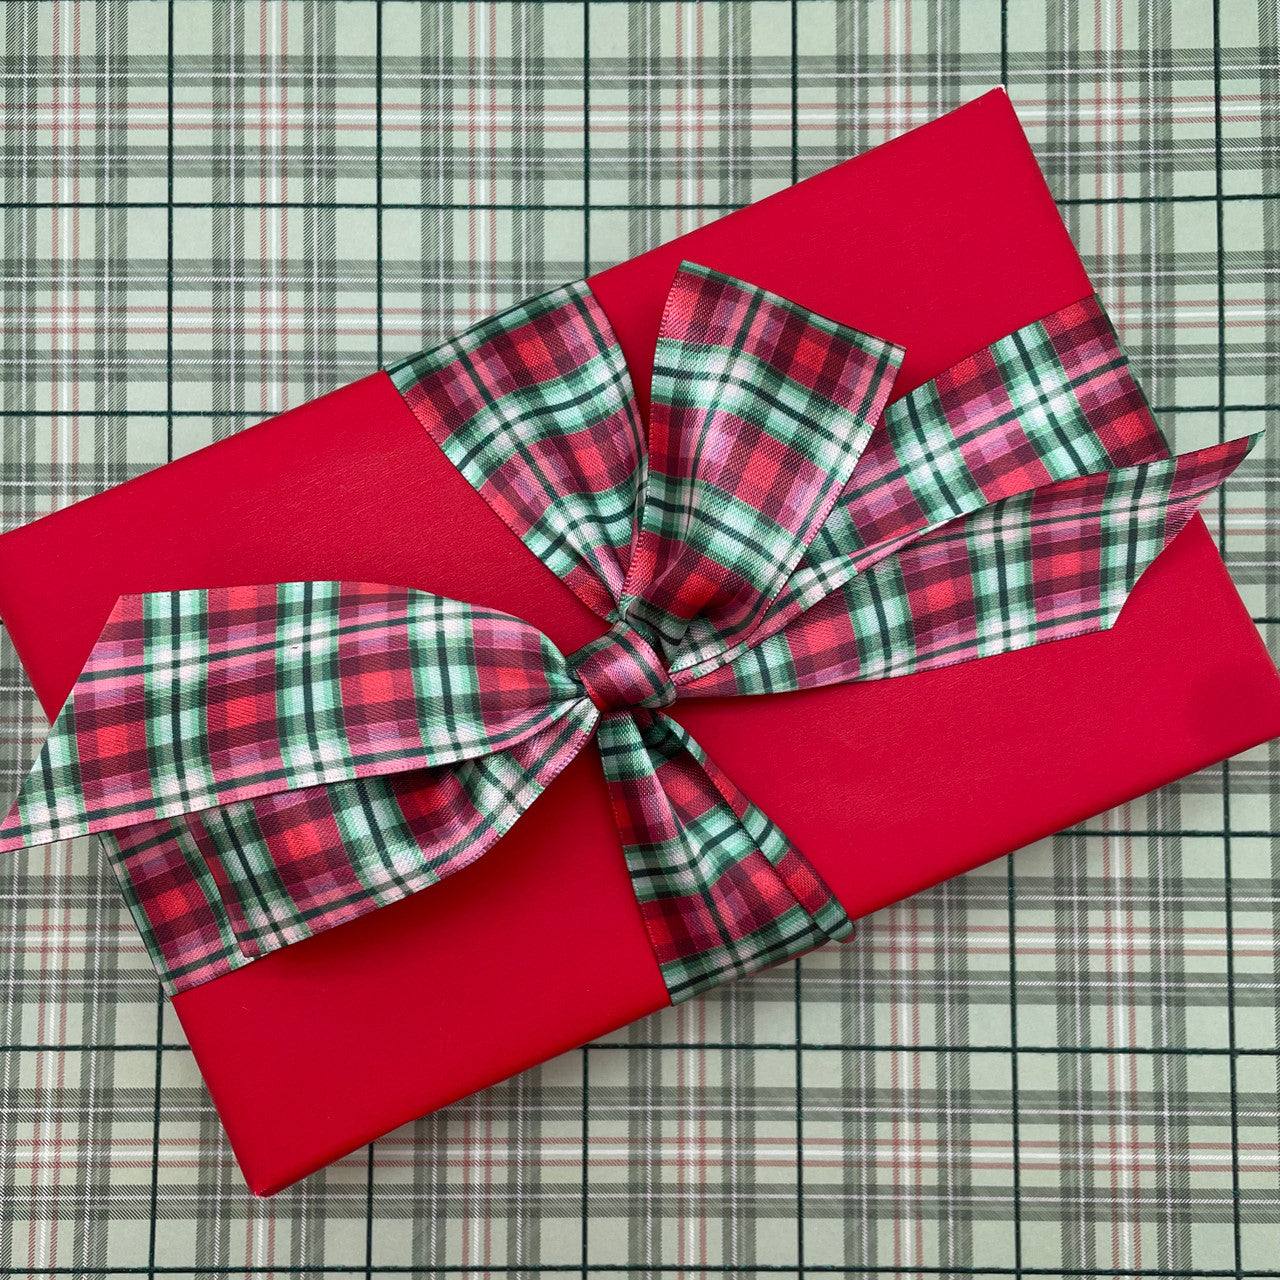 Our Christmas plaid tied in a beautiful bow makes for the ideal gift beneath the tree! 